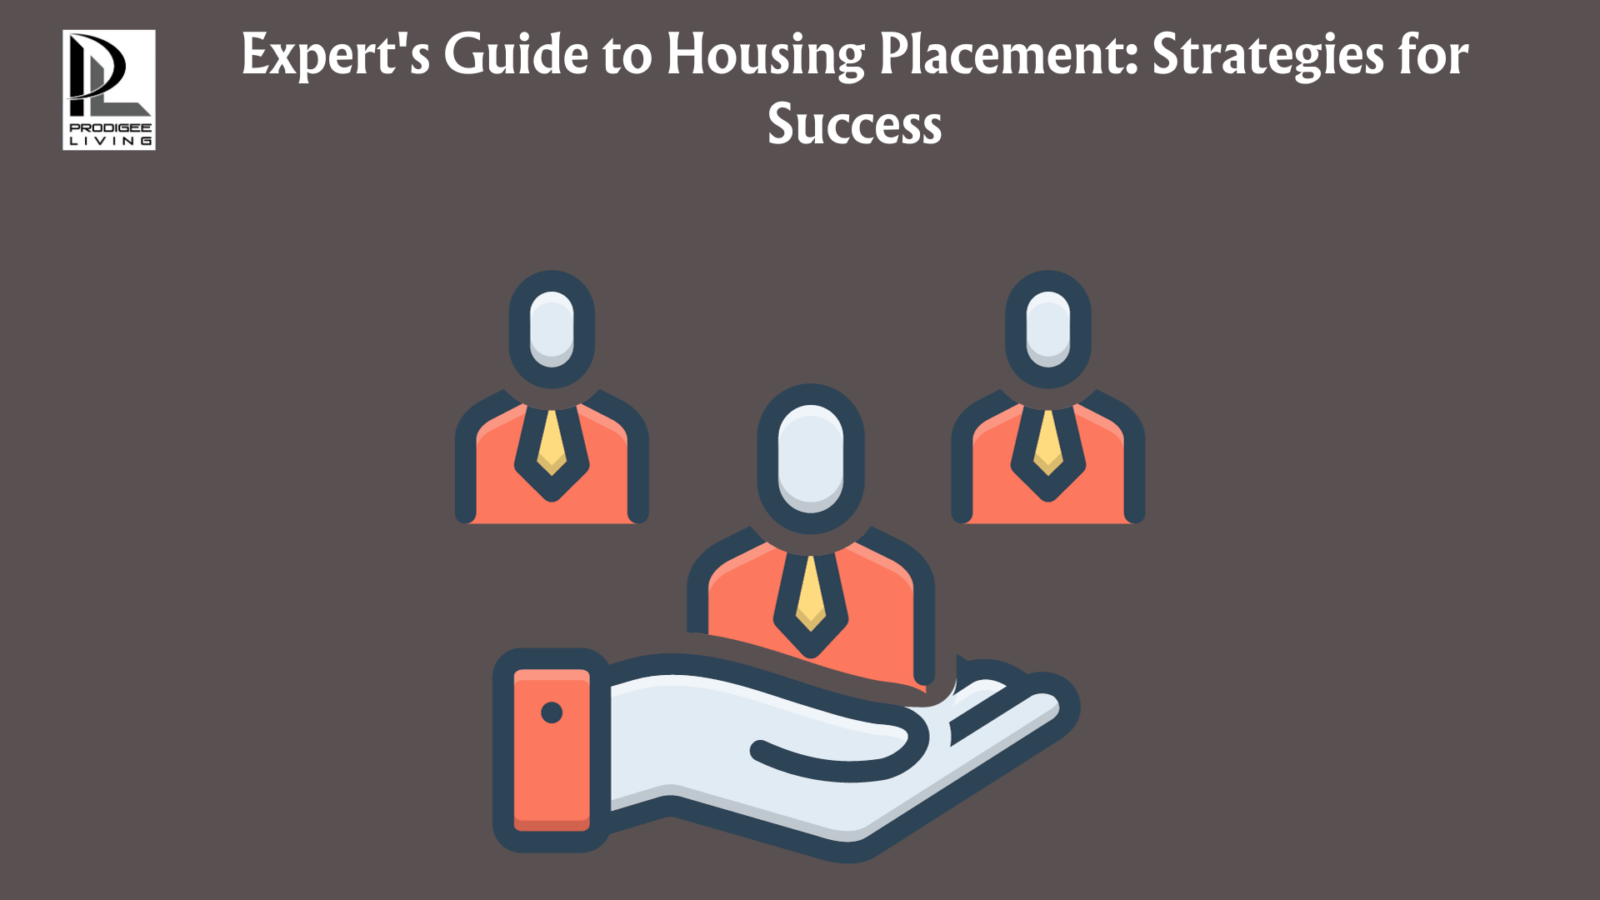 experts guide to housing placement: strategies for success